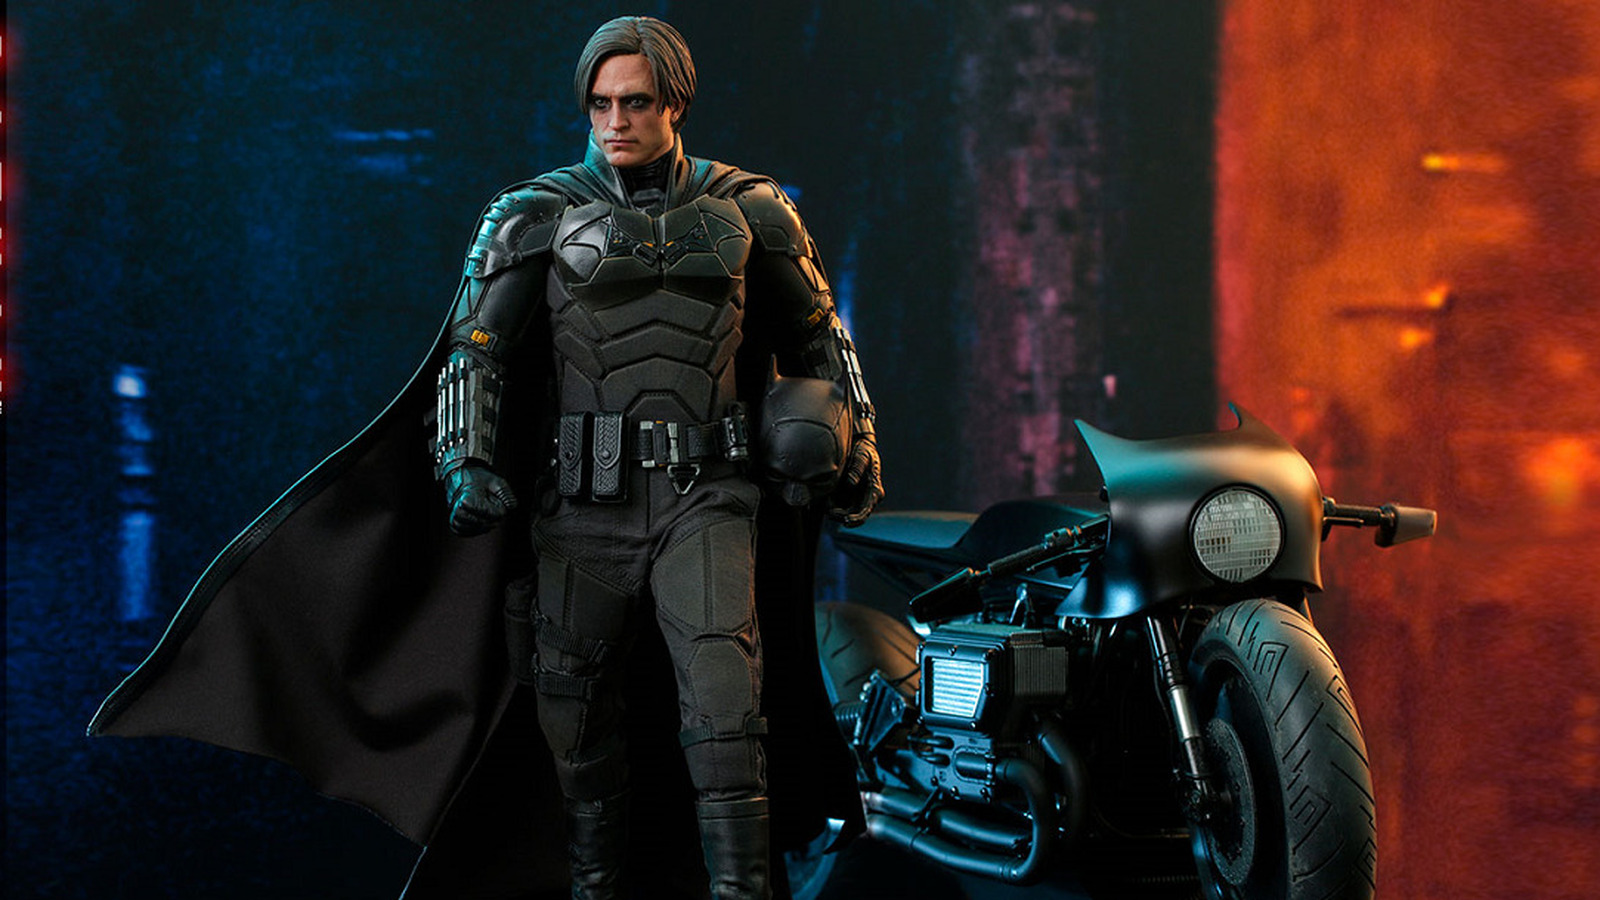 #The Batman Hot Toys Figure Is Vengeance, And There’s A Bat Signal Too